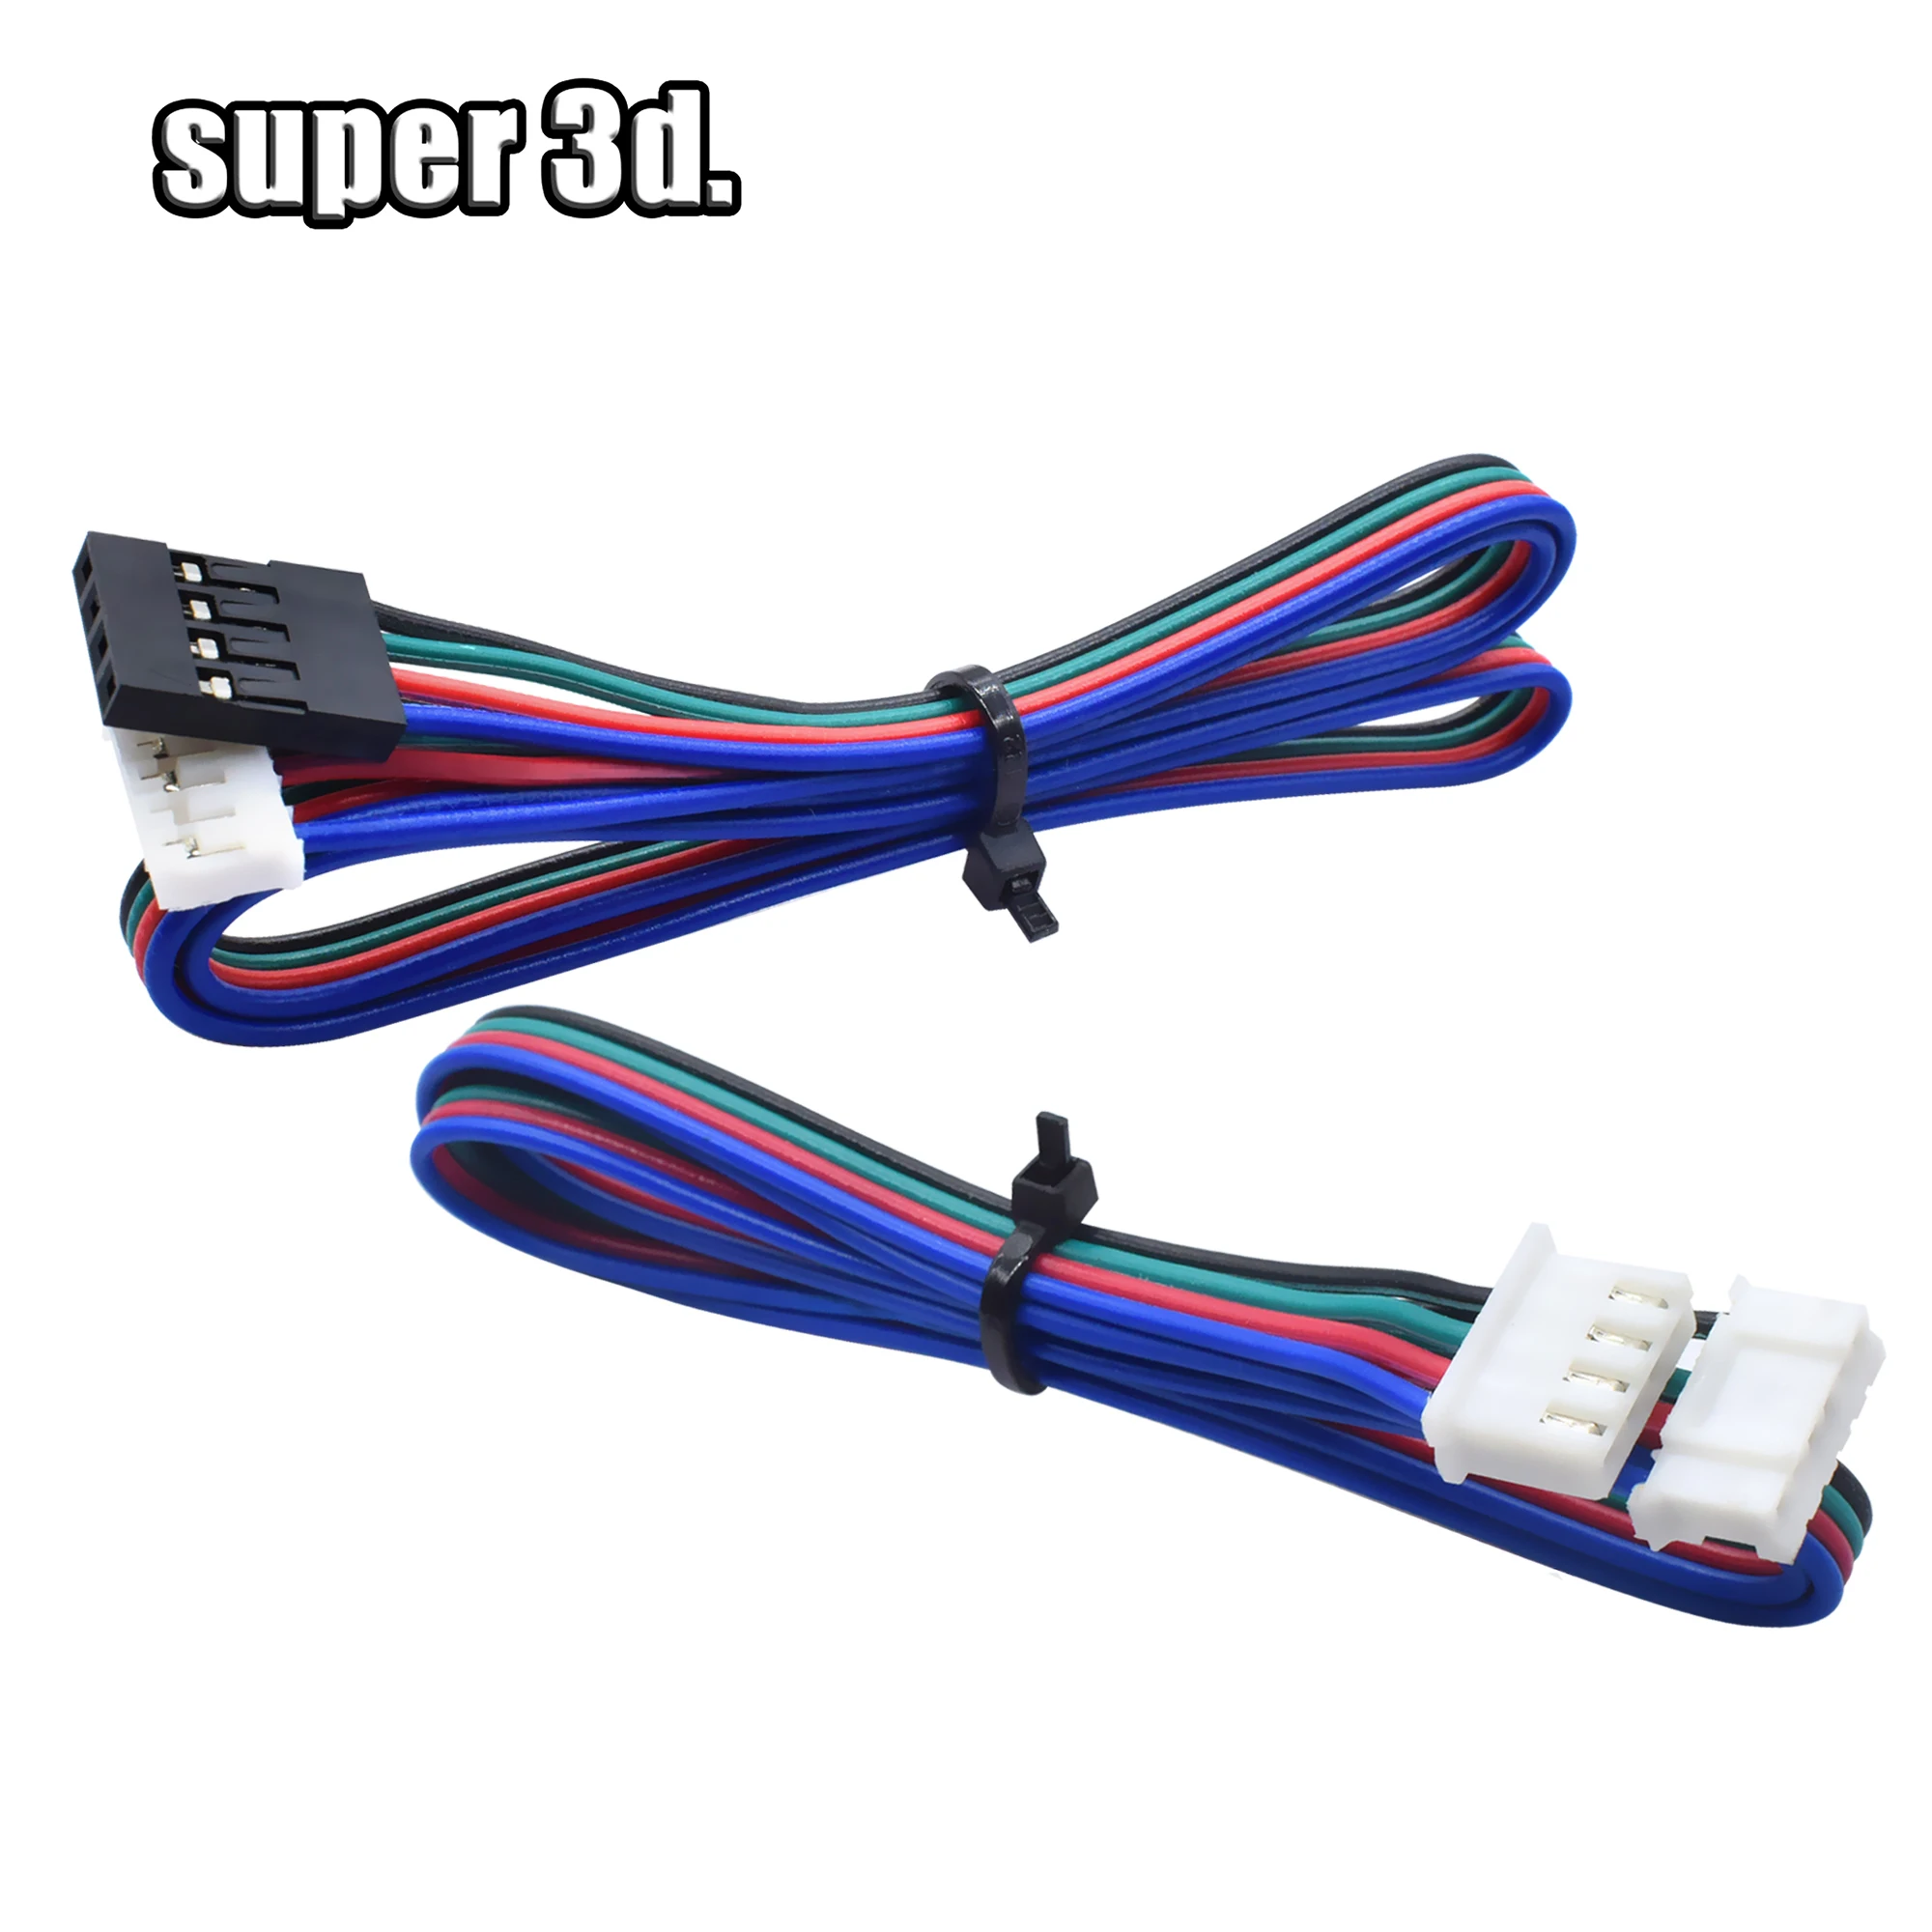 6pcs 1M Motor Connector Cables XH2.54 Terminal Motor Link 4pin-6pin Stepper Motor Cables for 3D Printer Stepper Motor